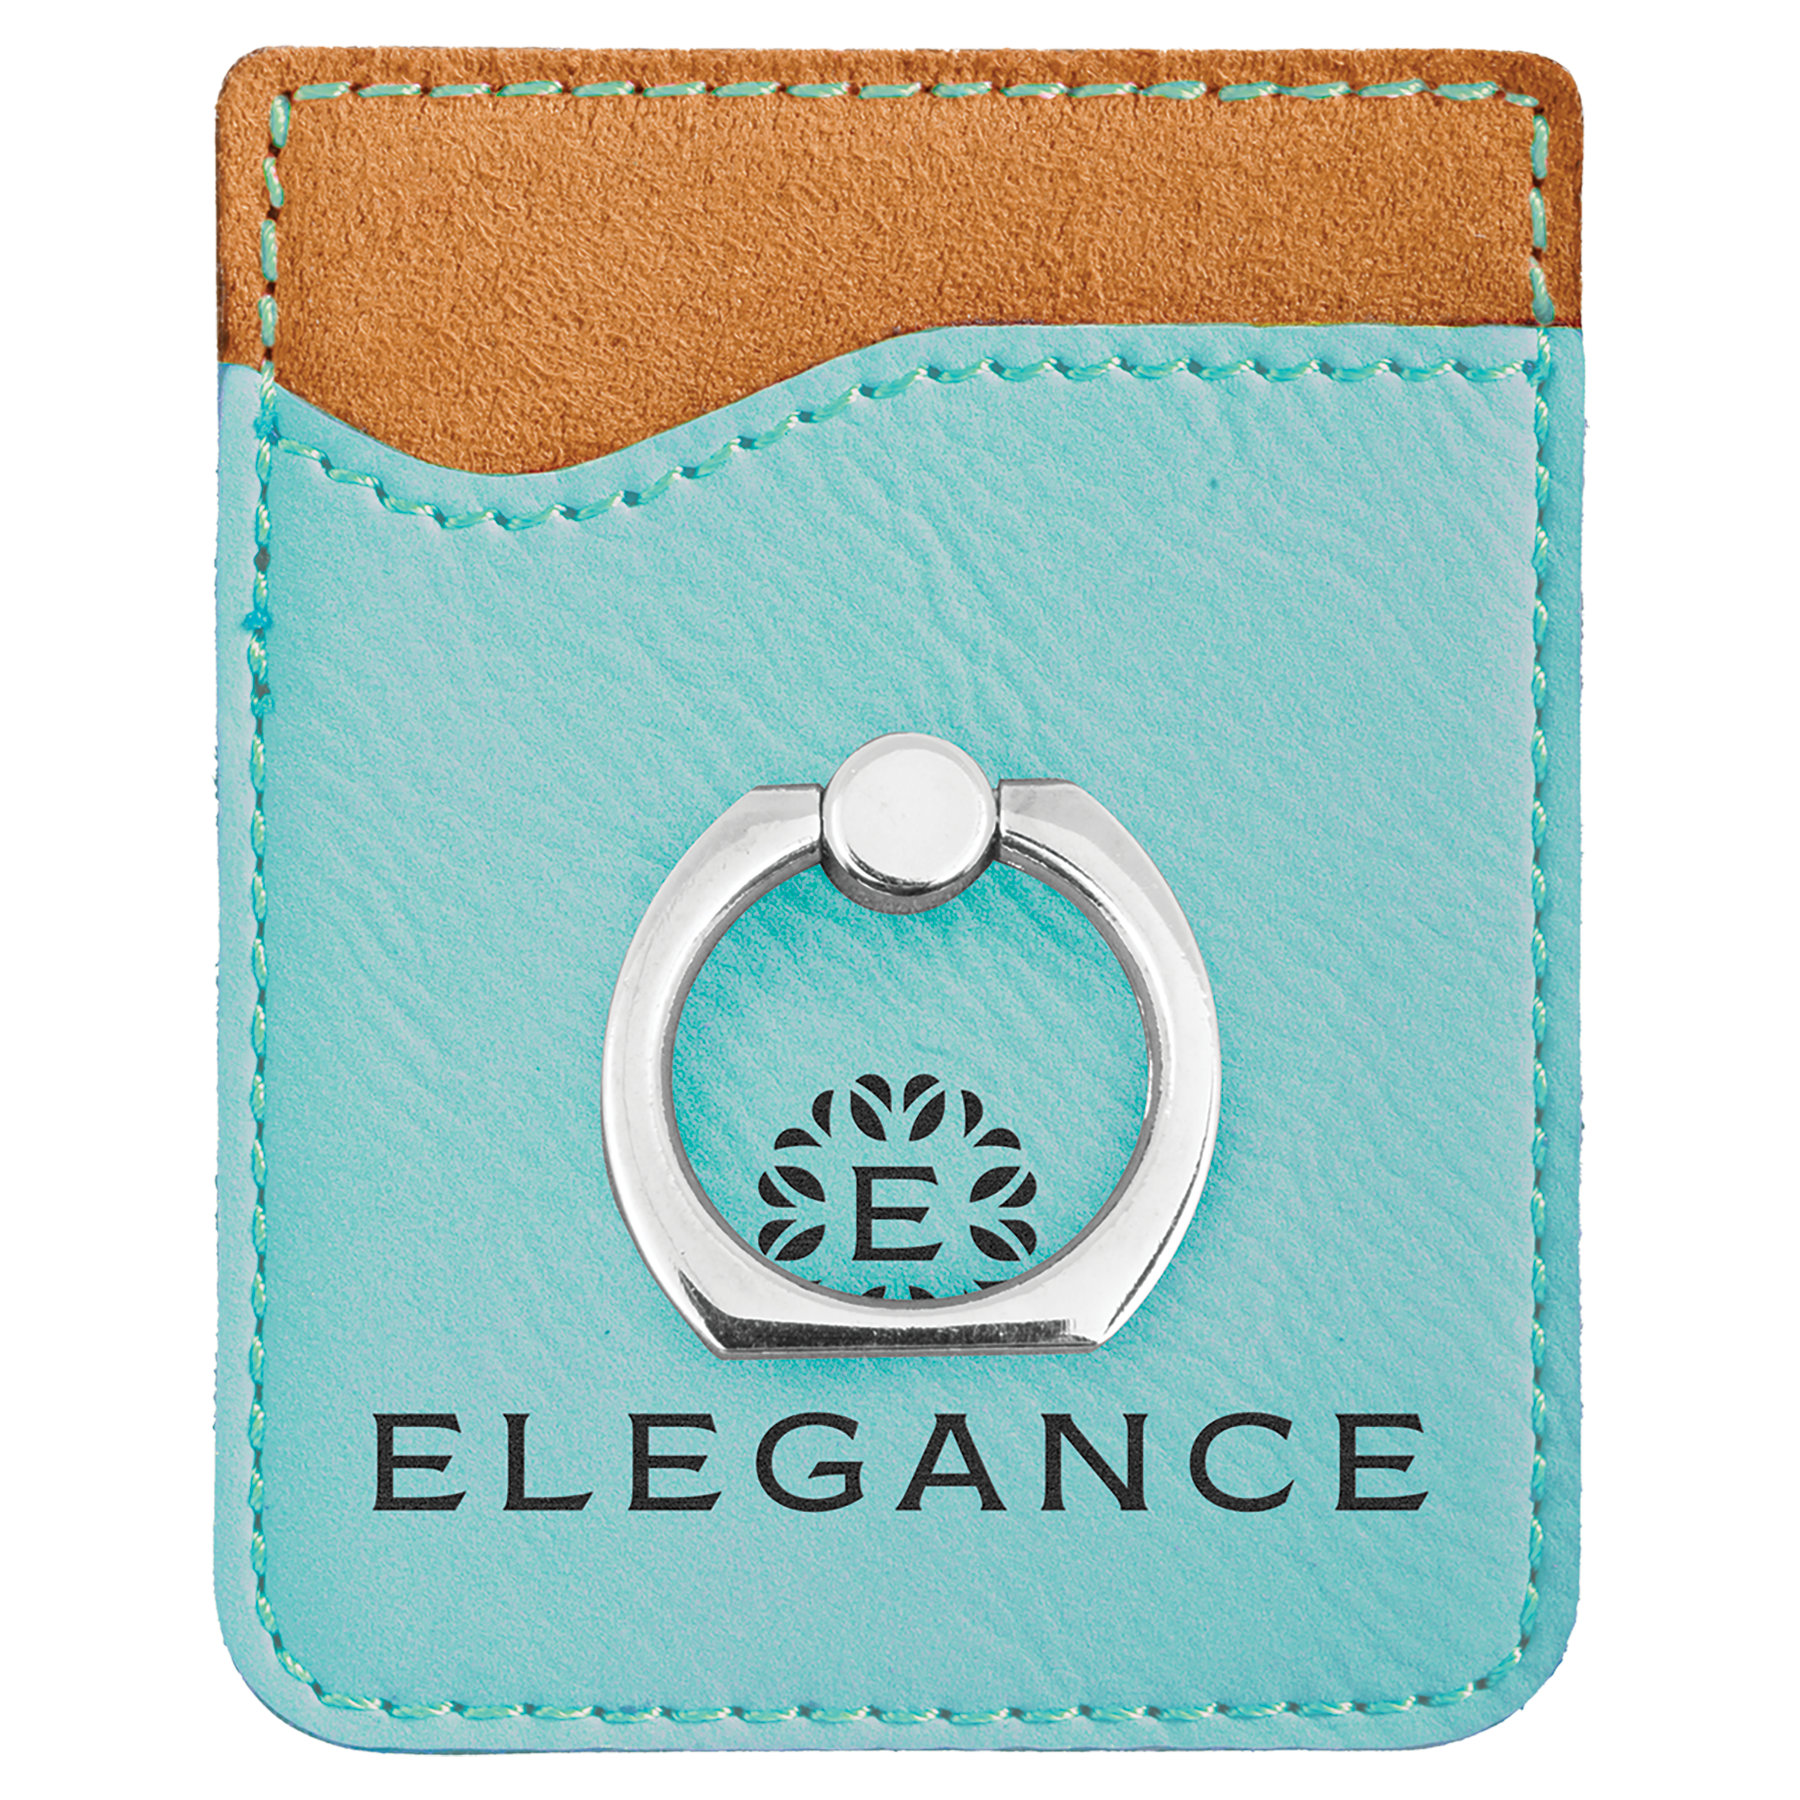 Leatherette Phone Wallet with Silver Ring